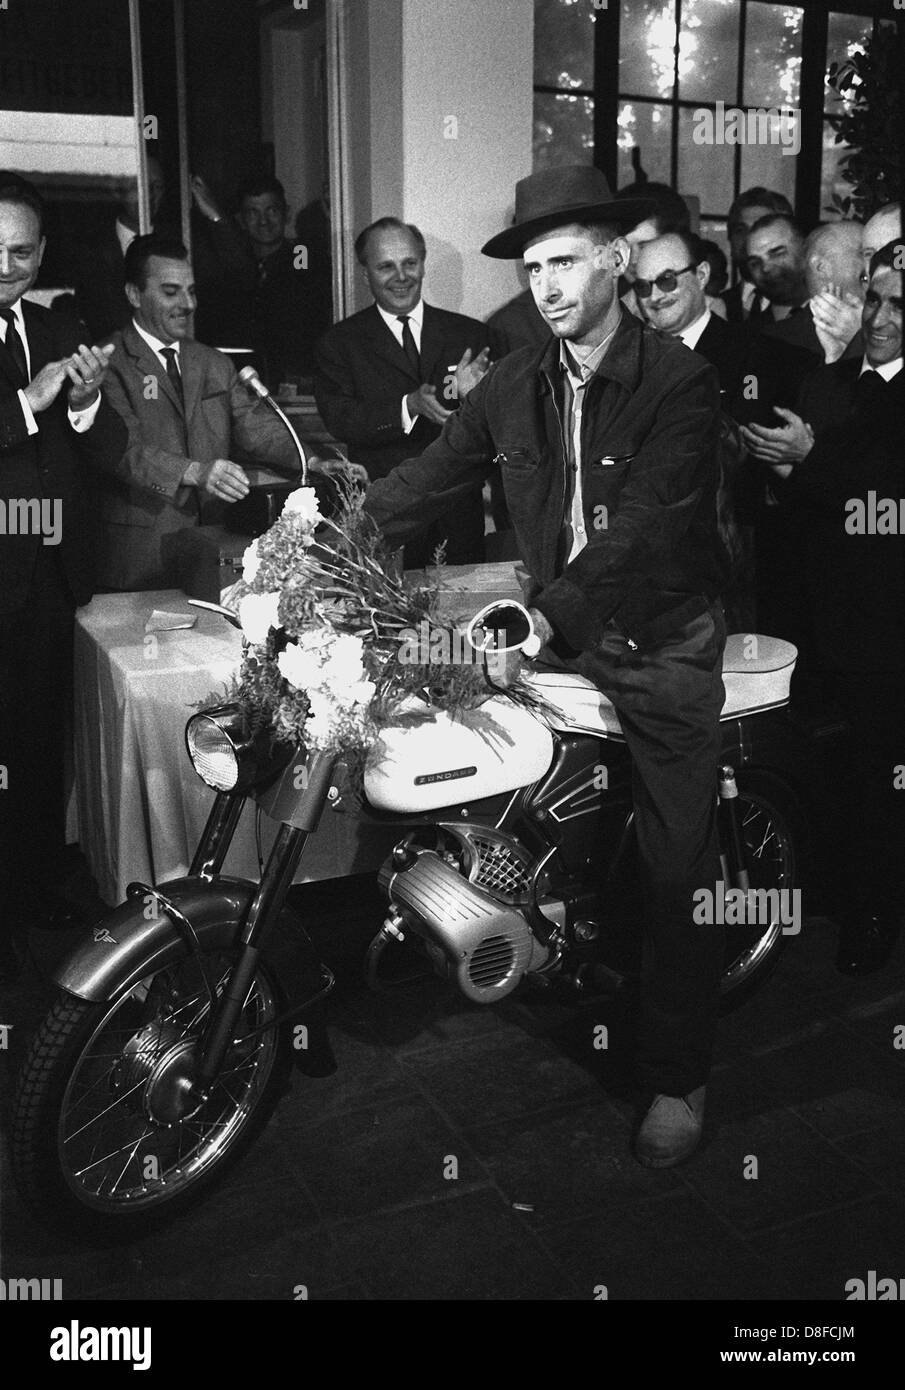 The millionth Gastarbeiter, Armado Rodrigues from Portugal, arrives in the Federal Republic of Germany and receives a moped as a present in Cologne. Stock Photo